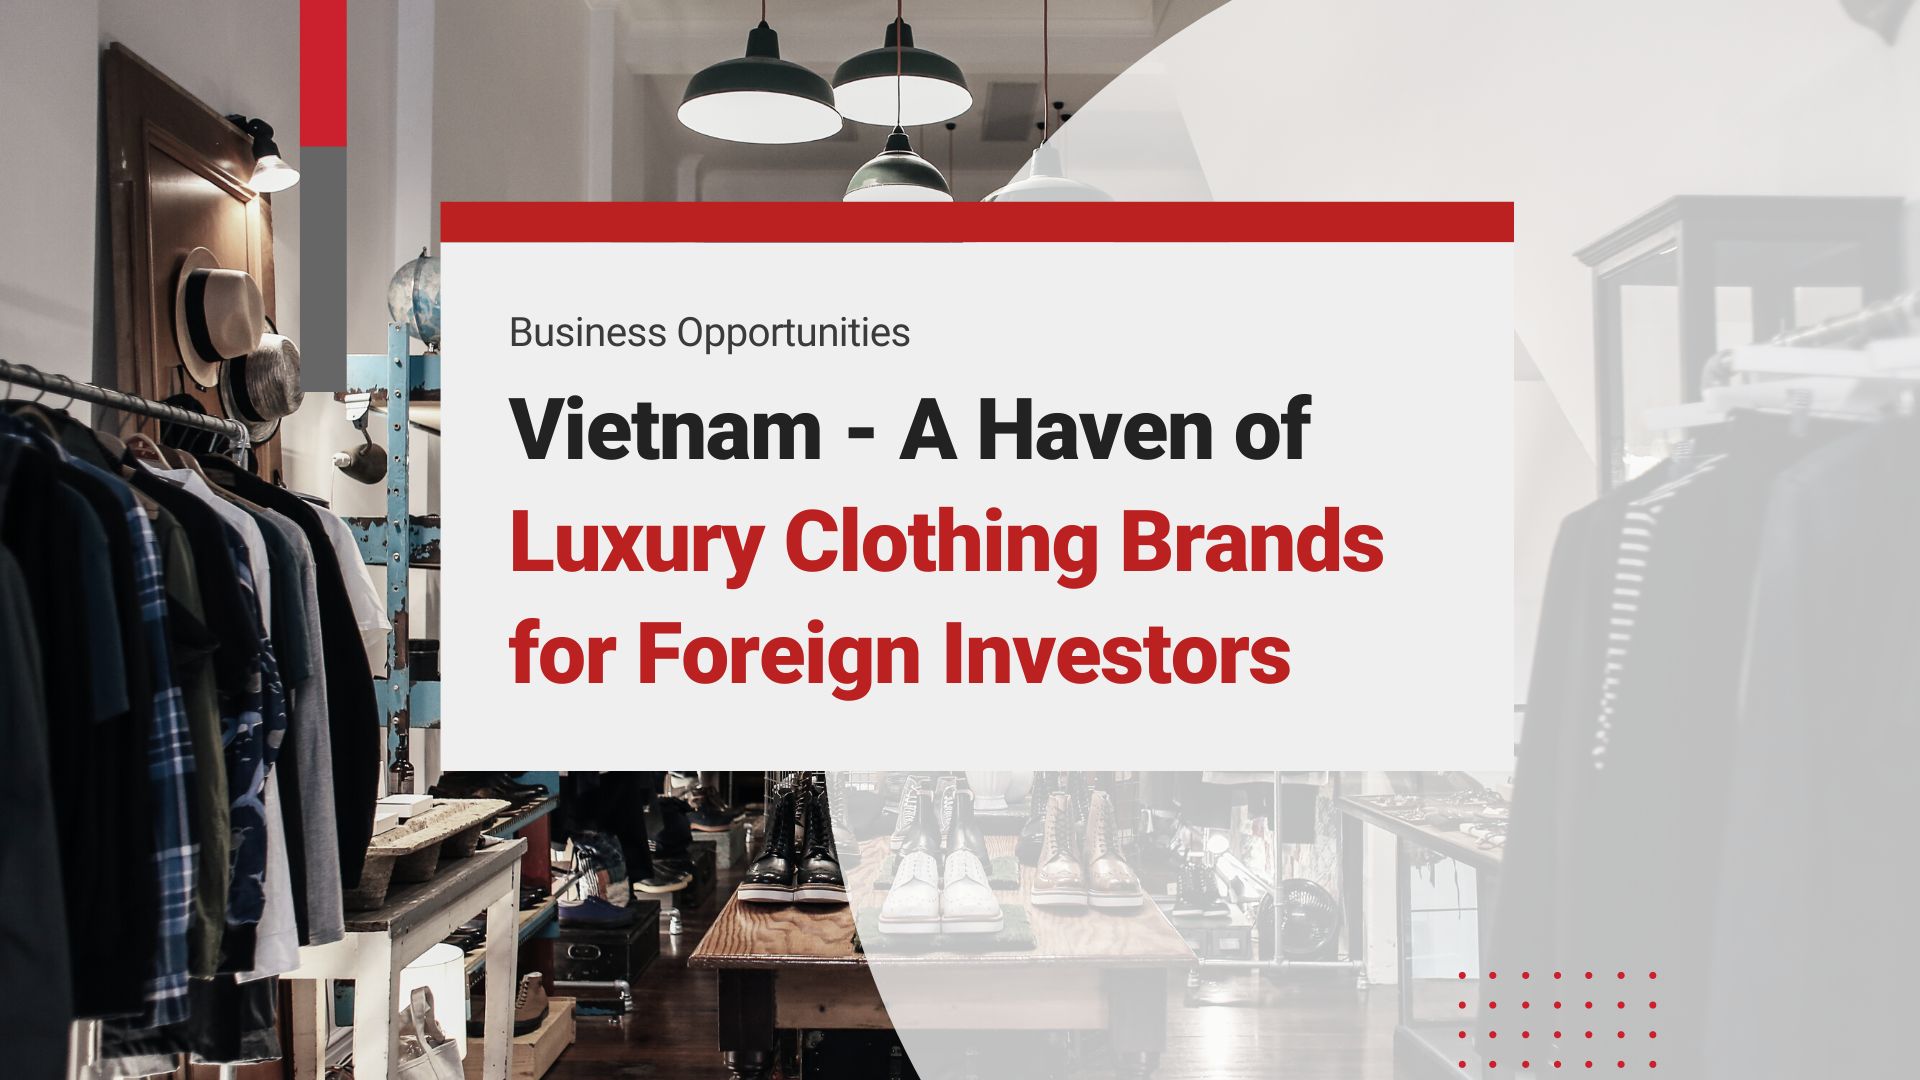 Exploring Vietnam as a Prime Destination for Luxury Clothing Brands: A Haven for Foreign Investors